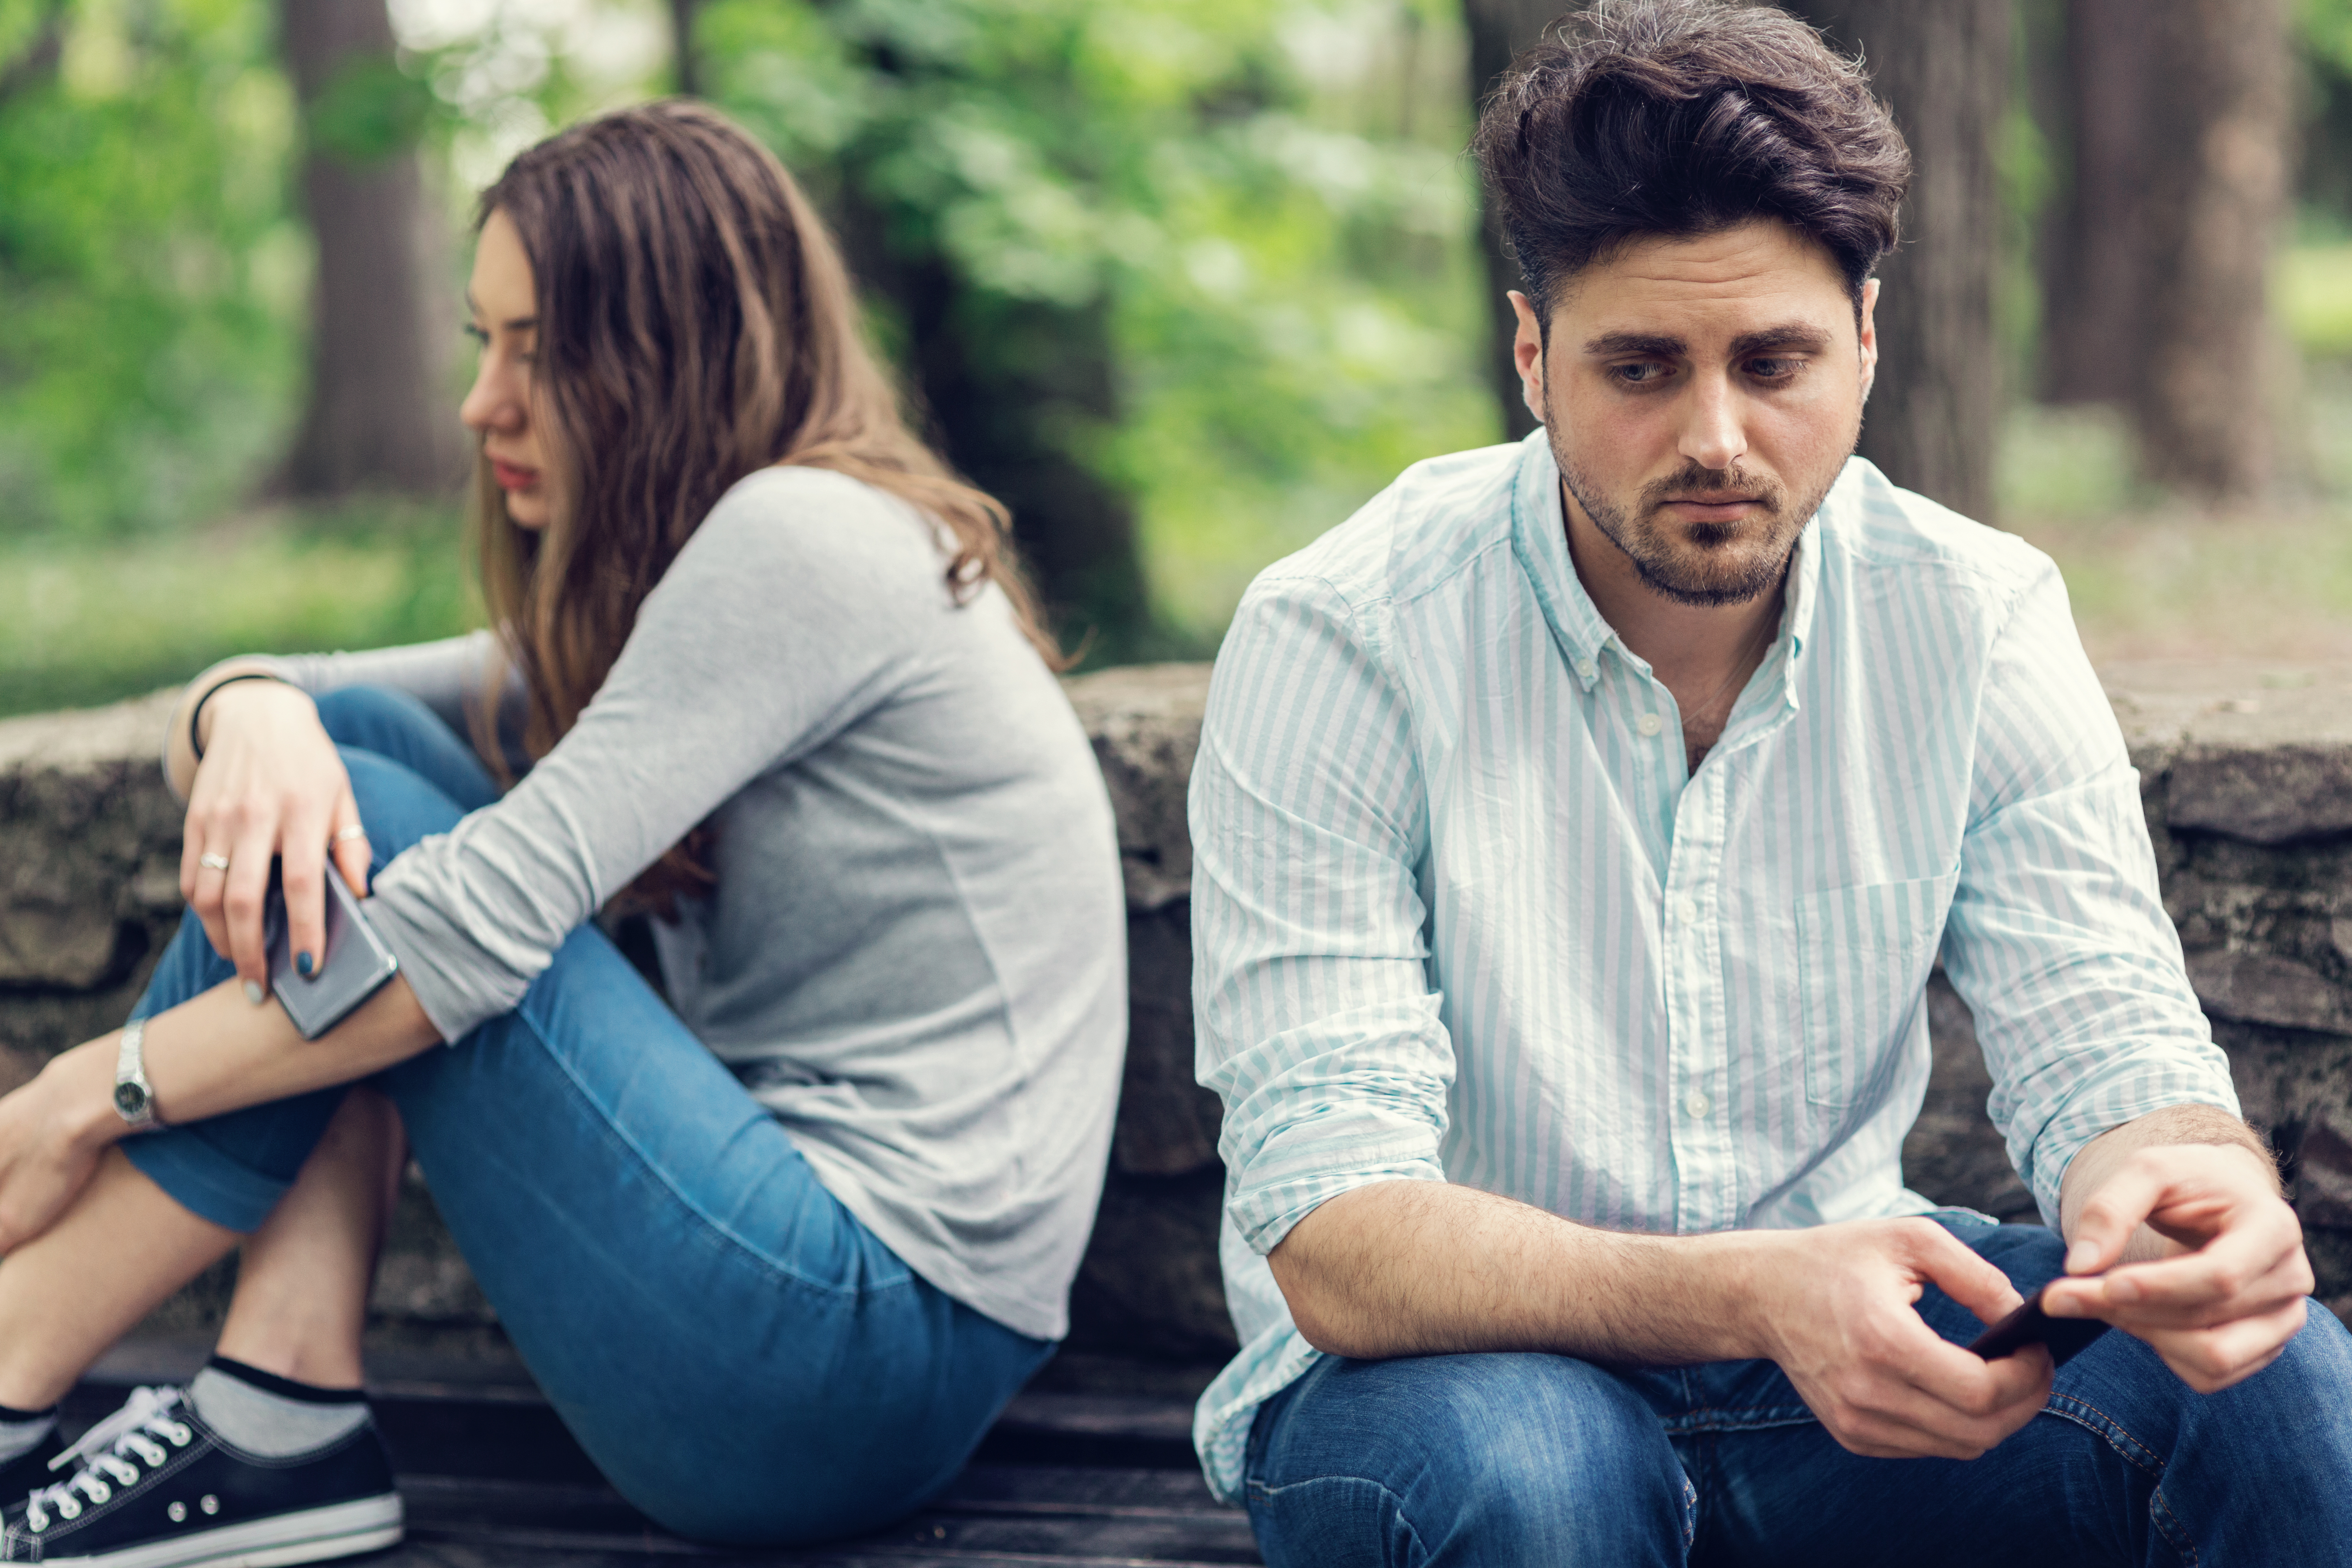 Young couple in relationship difficulties staying away from each other | Source: Getty Images